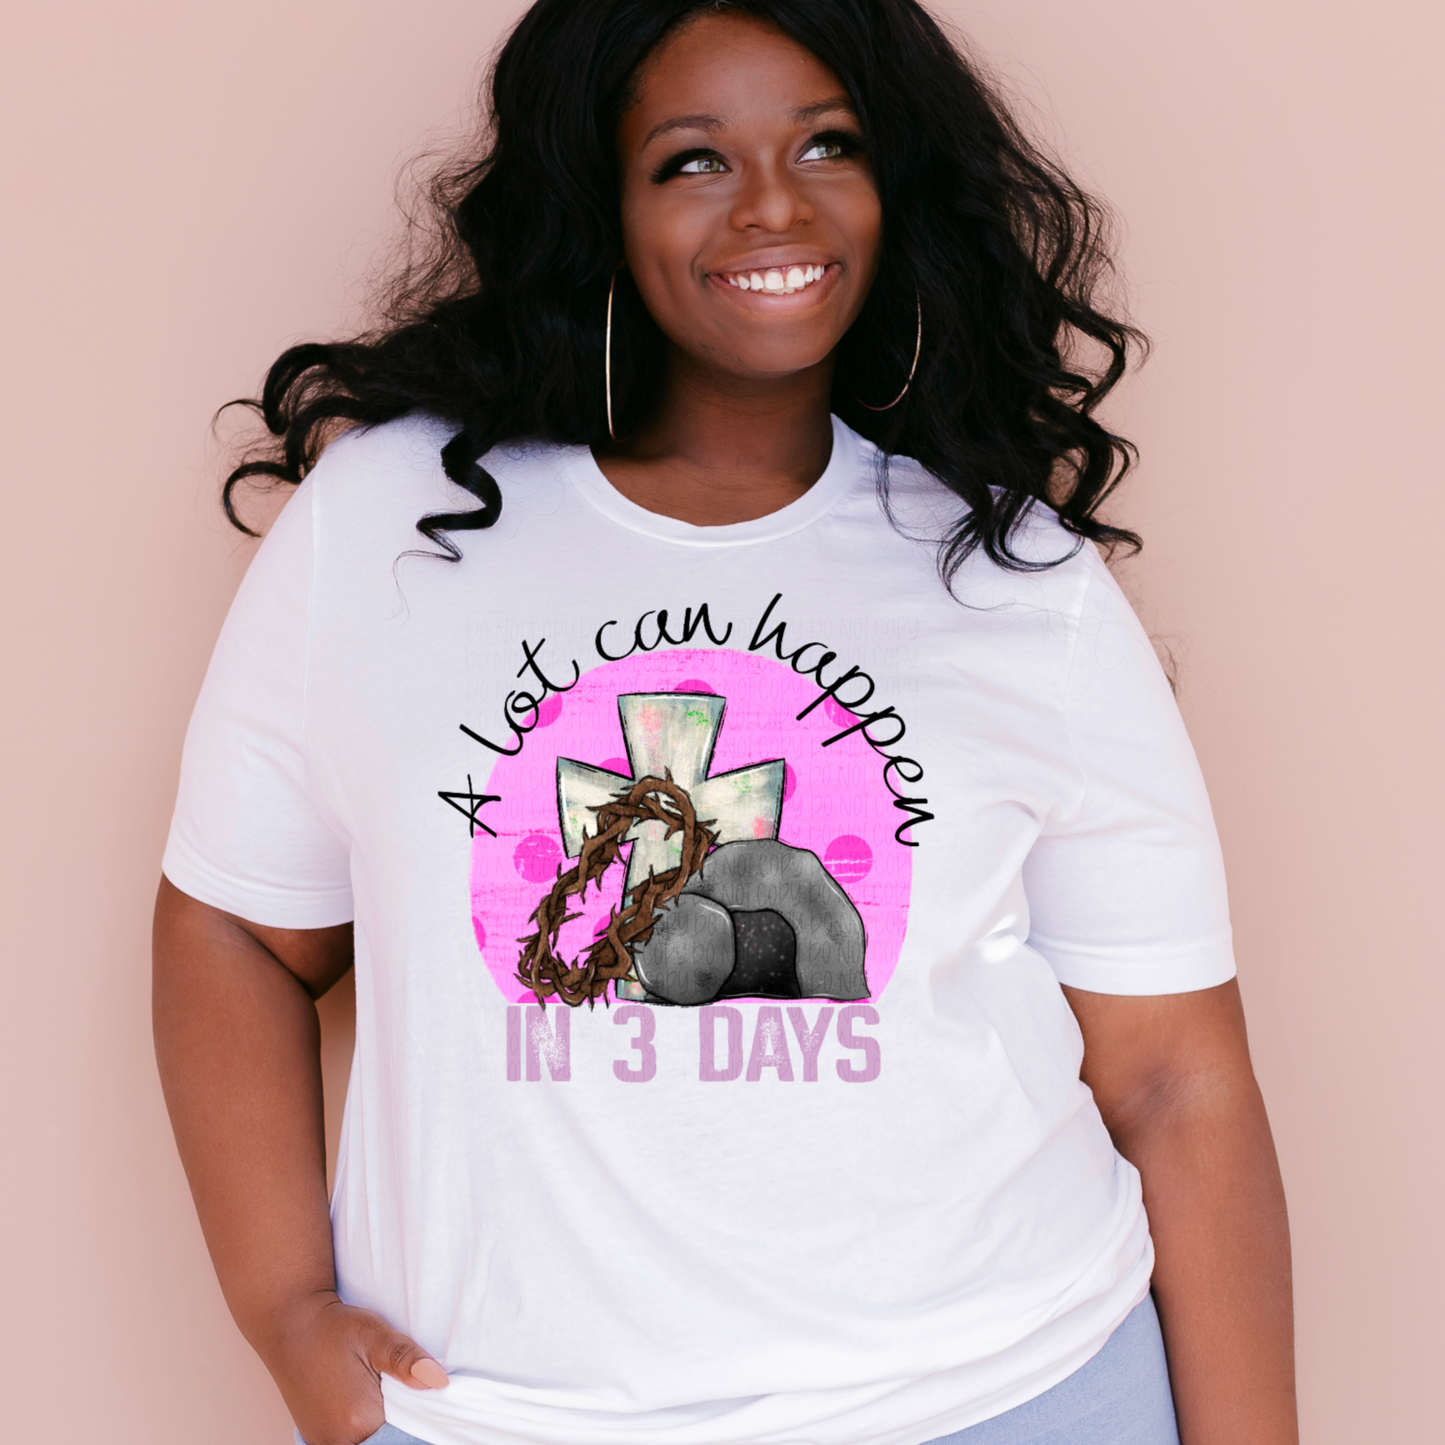 A Lot Can Happen in 3 Days T-shirt